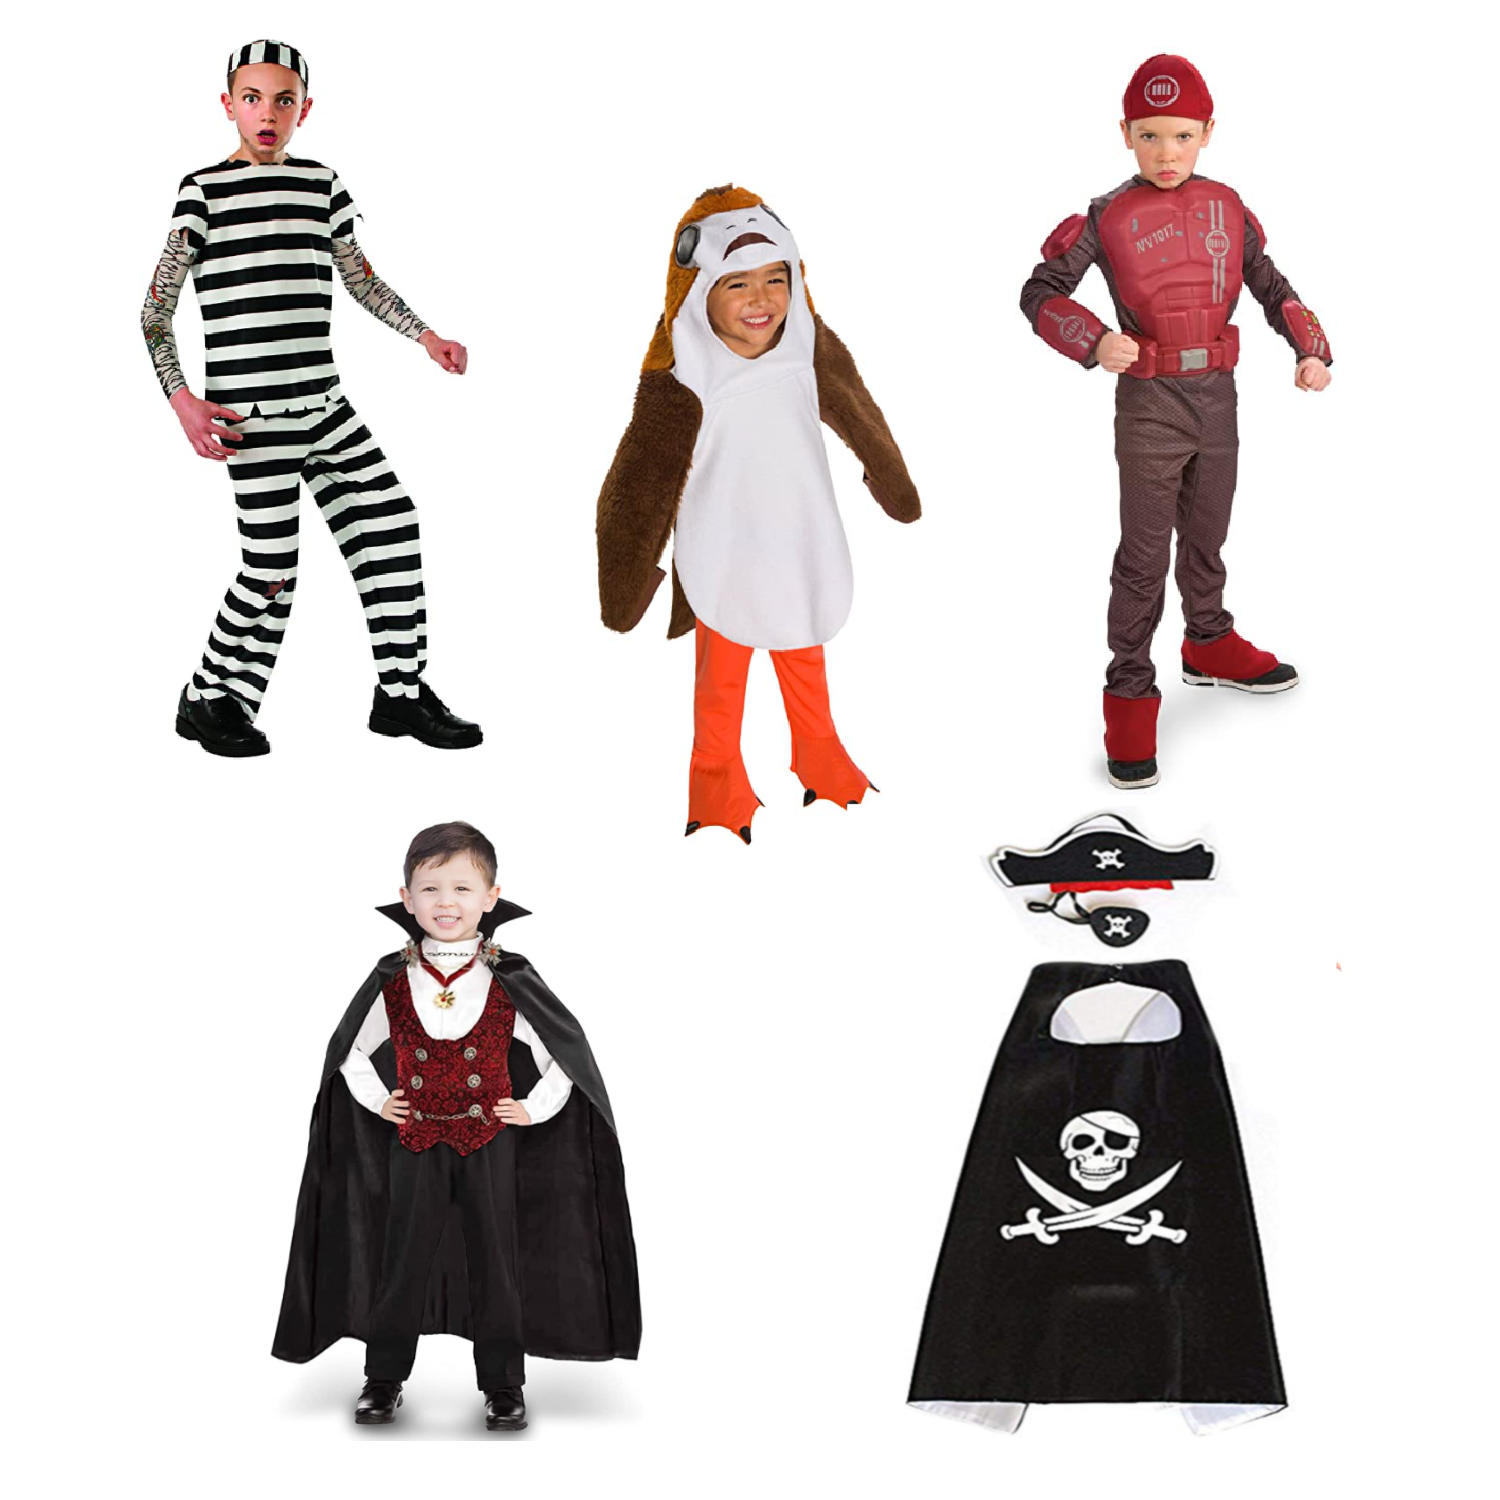 Halloween costumes under $10 - prisoner, Porg, Special Forces, vampire, and pirate.